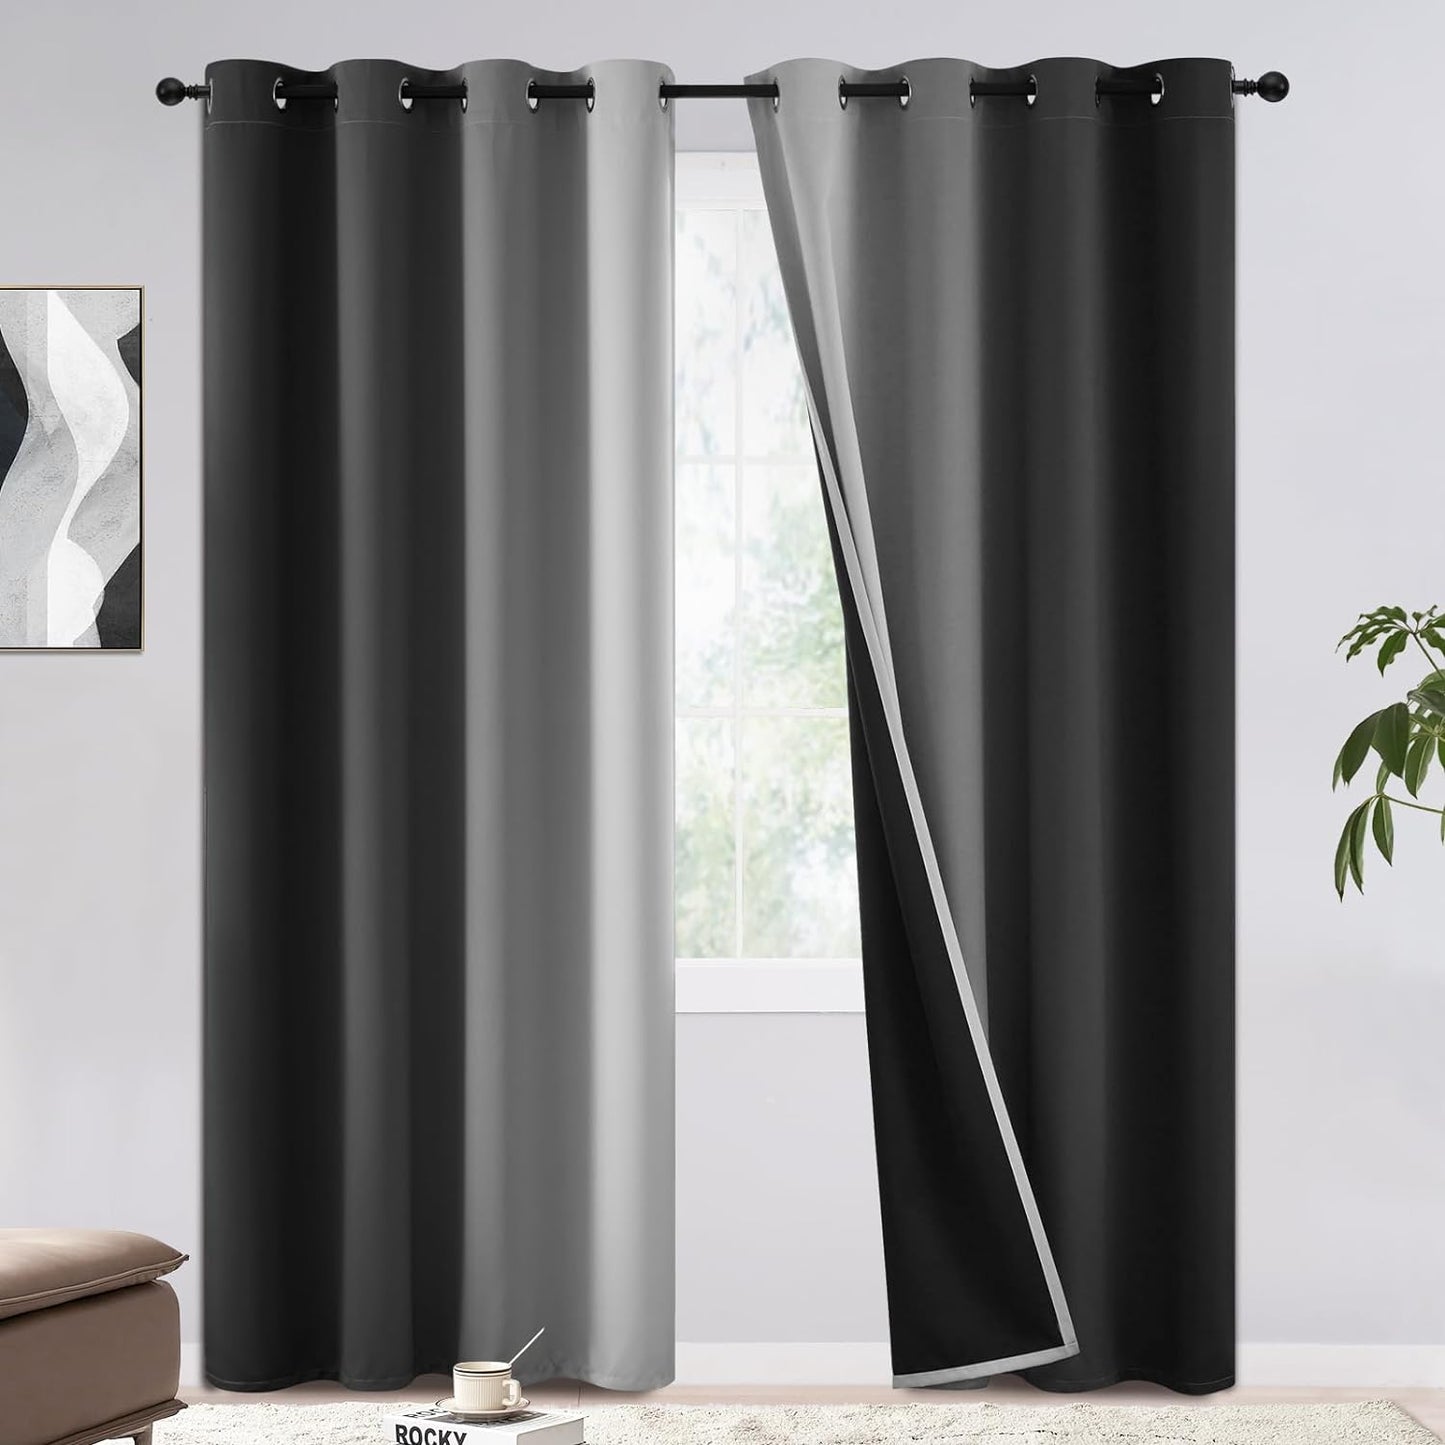 COSVIYA 100% Blackout Curtains & Drapes Ombre Purple Curtains 63 Inch Length 2 Panels,Full Room Darkening Grommet Gradient Insulated Thermal Window Curtains for Bedroom/Living Room,52X63 Inches  COSVIYA Black To Greyish White 52W X 84L 